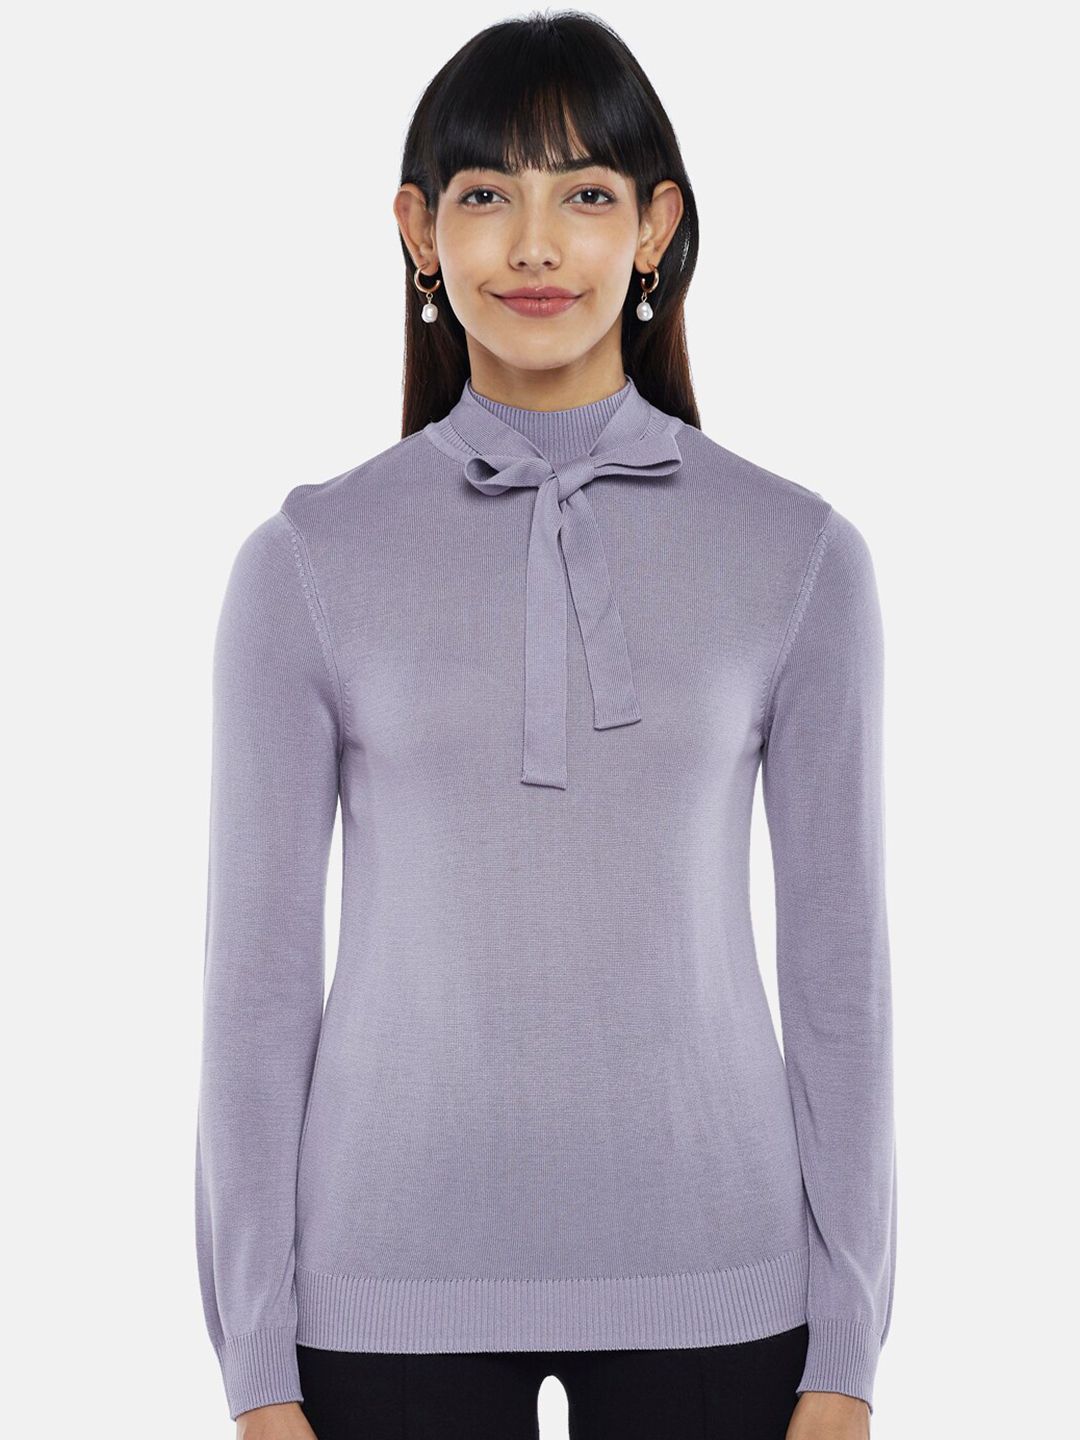 Annabelle by Pantaloons Lavender Solid Top Price in India